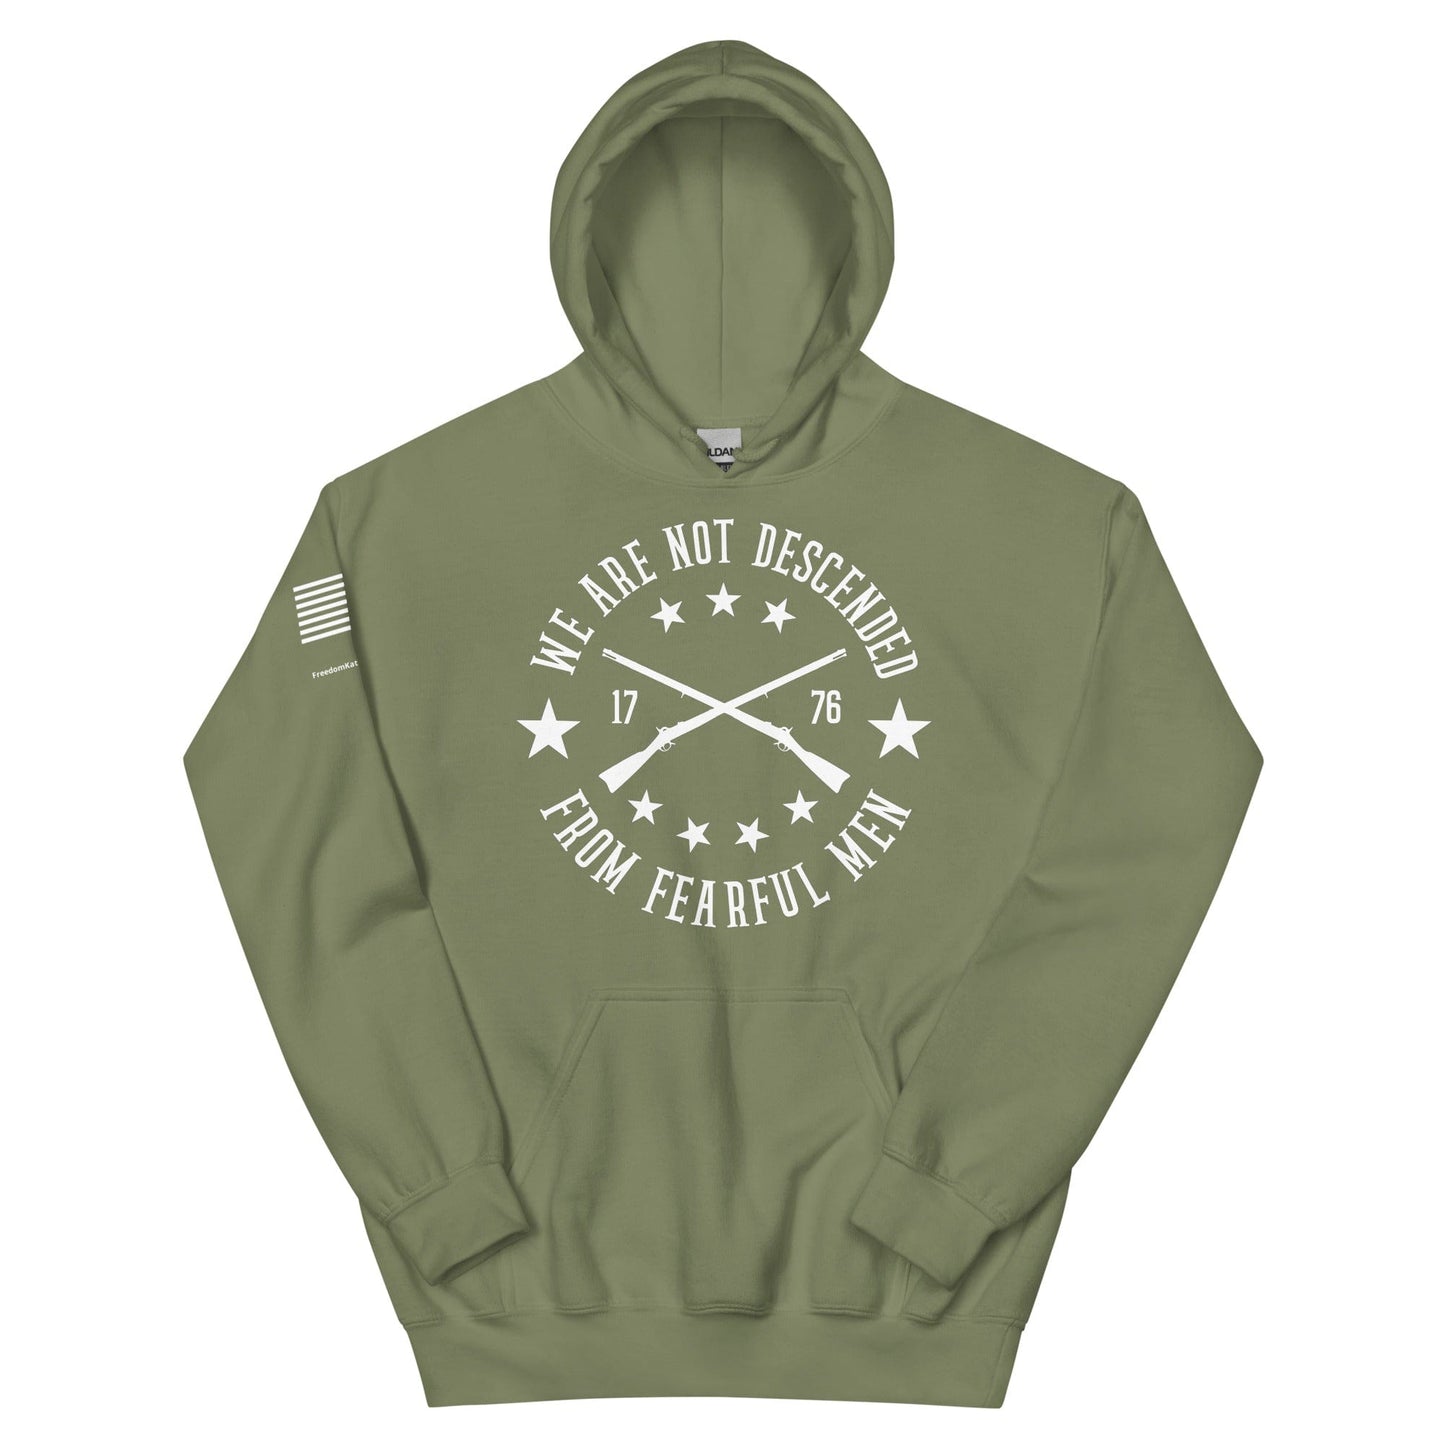 FreedomKat Designs Hoodie Military Green / S We Are Not Descended From Fearful Men Hoodie